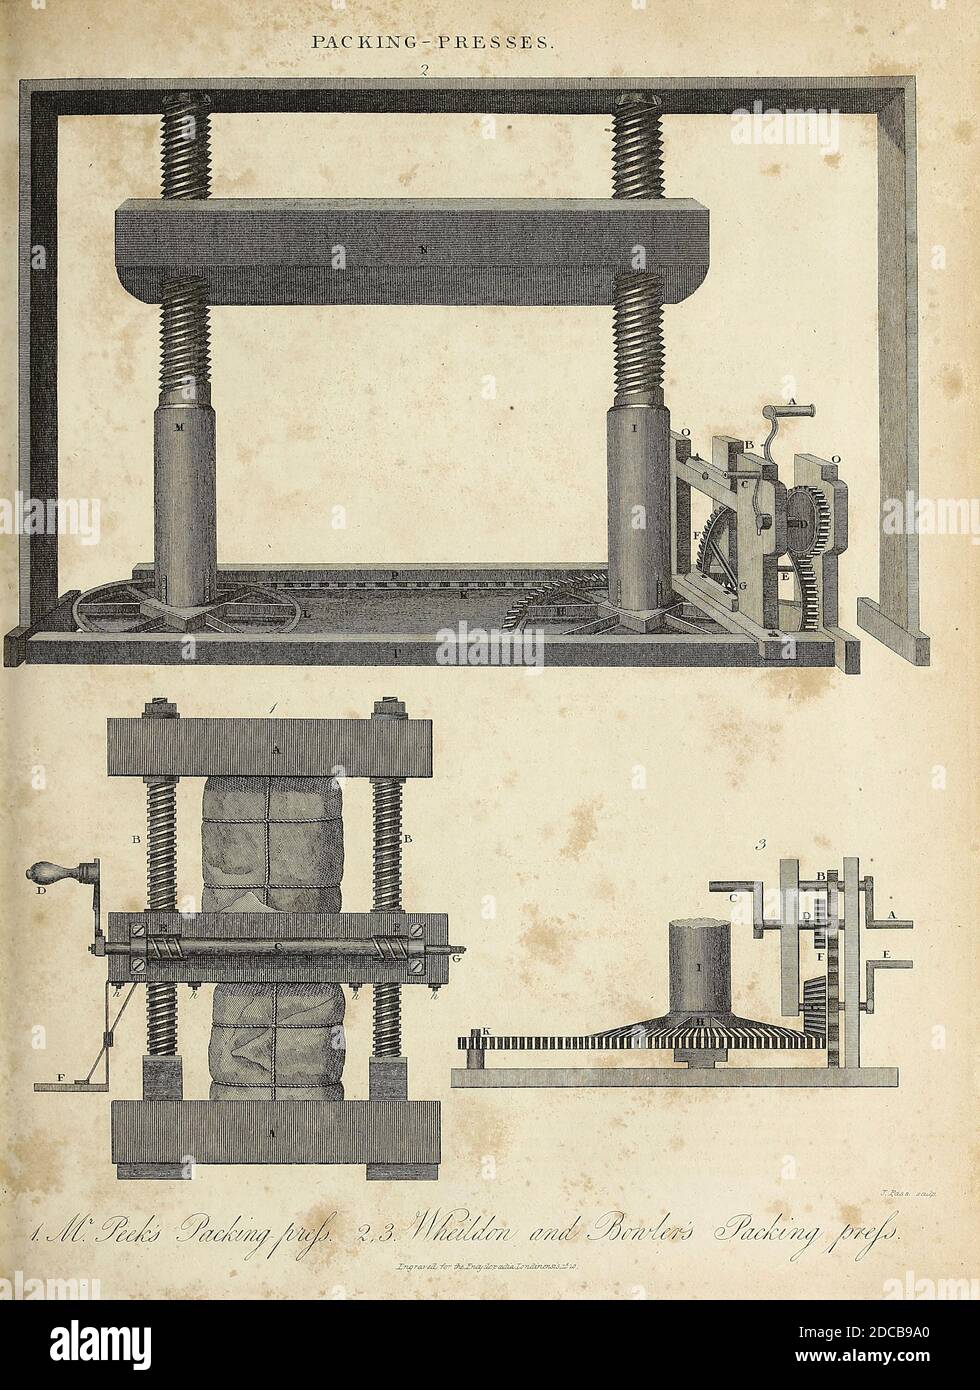 Mechanical Screw action Packing press Copperplate engraving From the Encyclopaedia Londinensis or, Universal dictionary of arts, sciences, and literature; Volume XVIII;  Edited by Wilkes, John. Published in London in 1821 Stock Photo